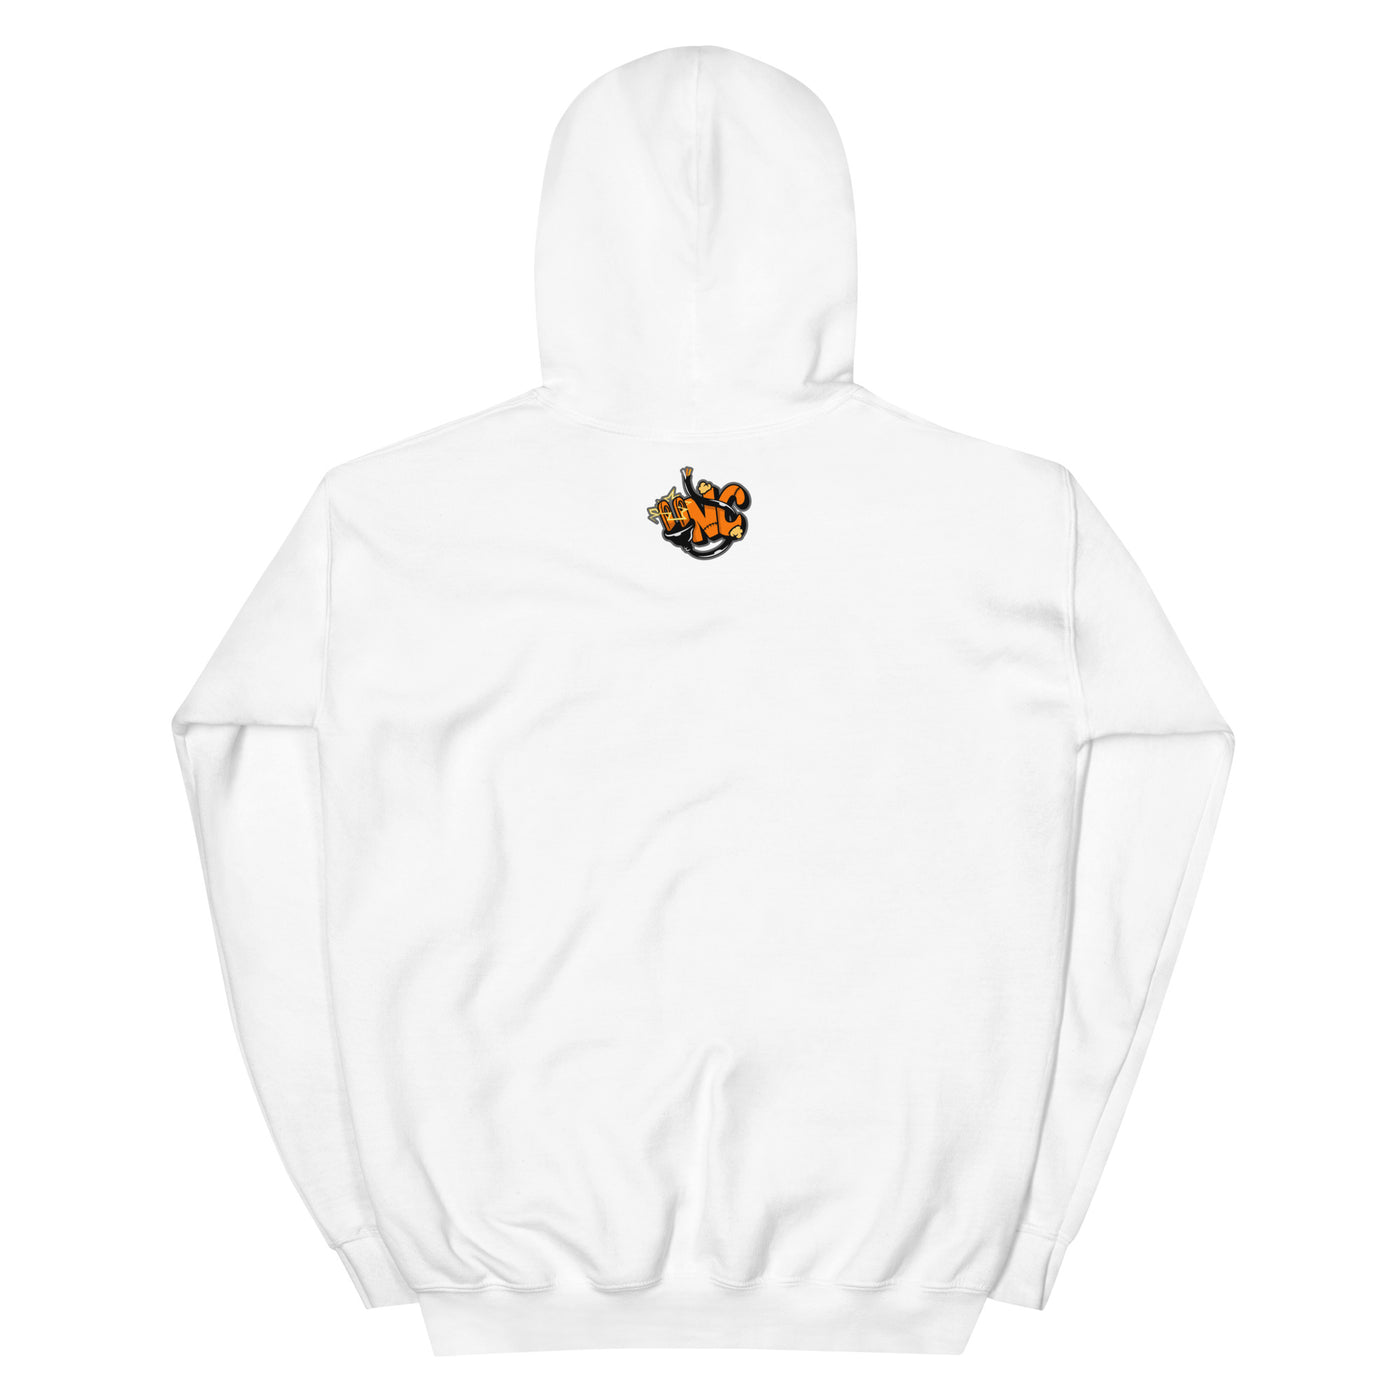 UNC Plugged In Hoodie (Giants Edition) - Unique Sweatsuits, hats, tees, shorts, hoodies, Outwear & accessories online | Uneekly Nsane